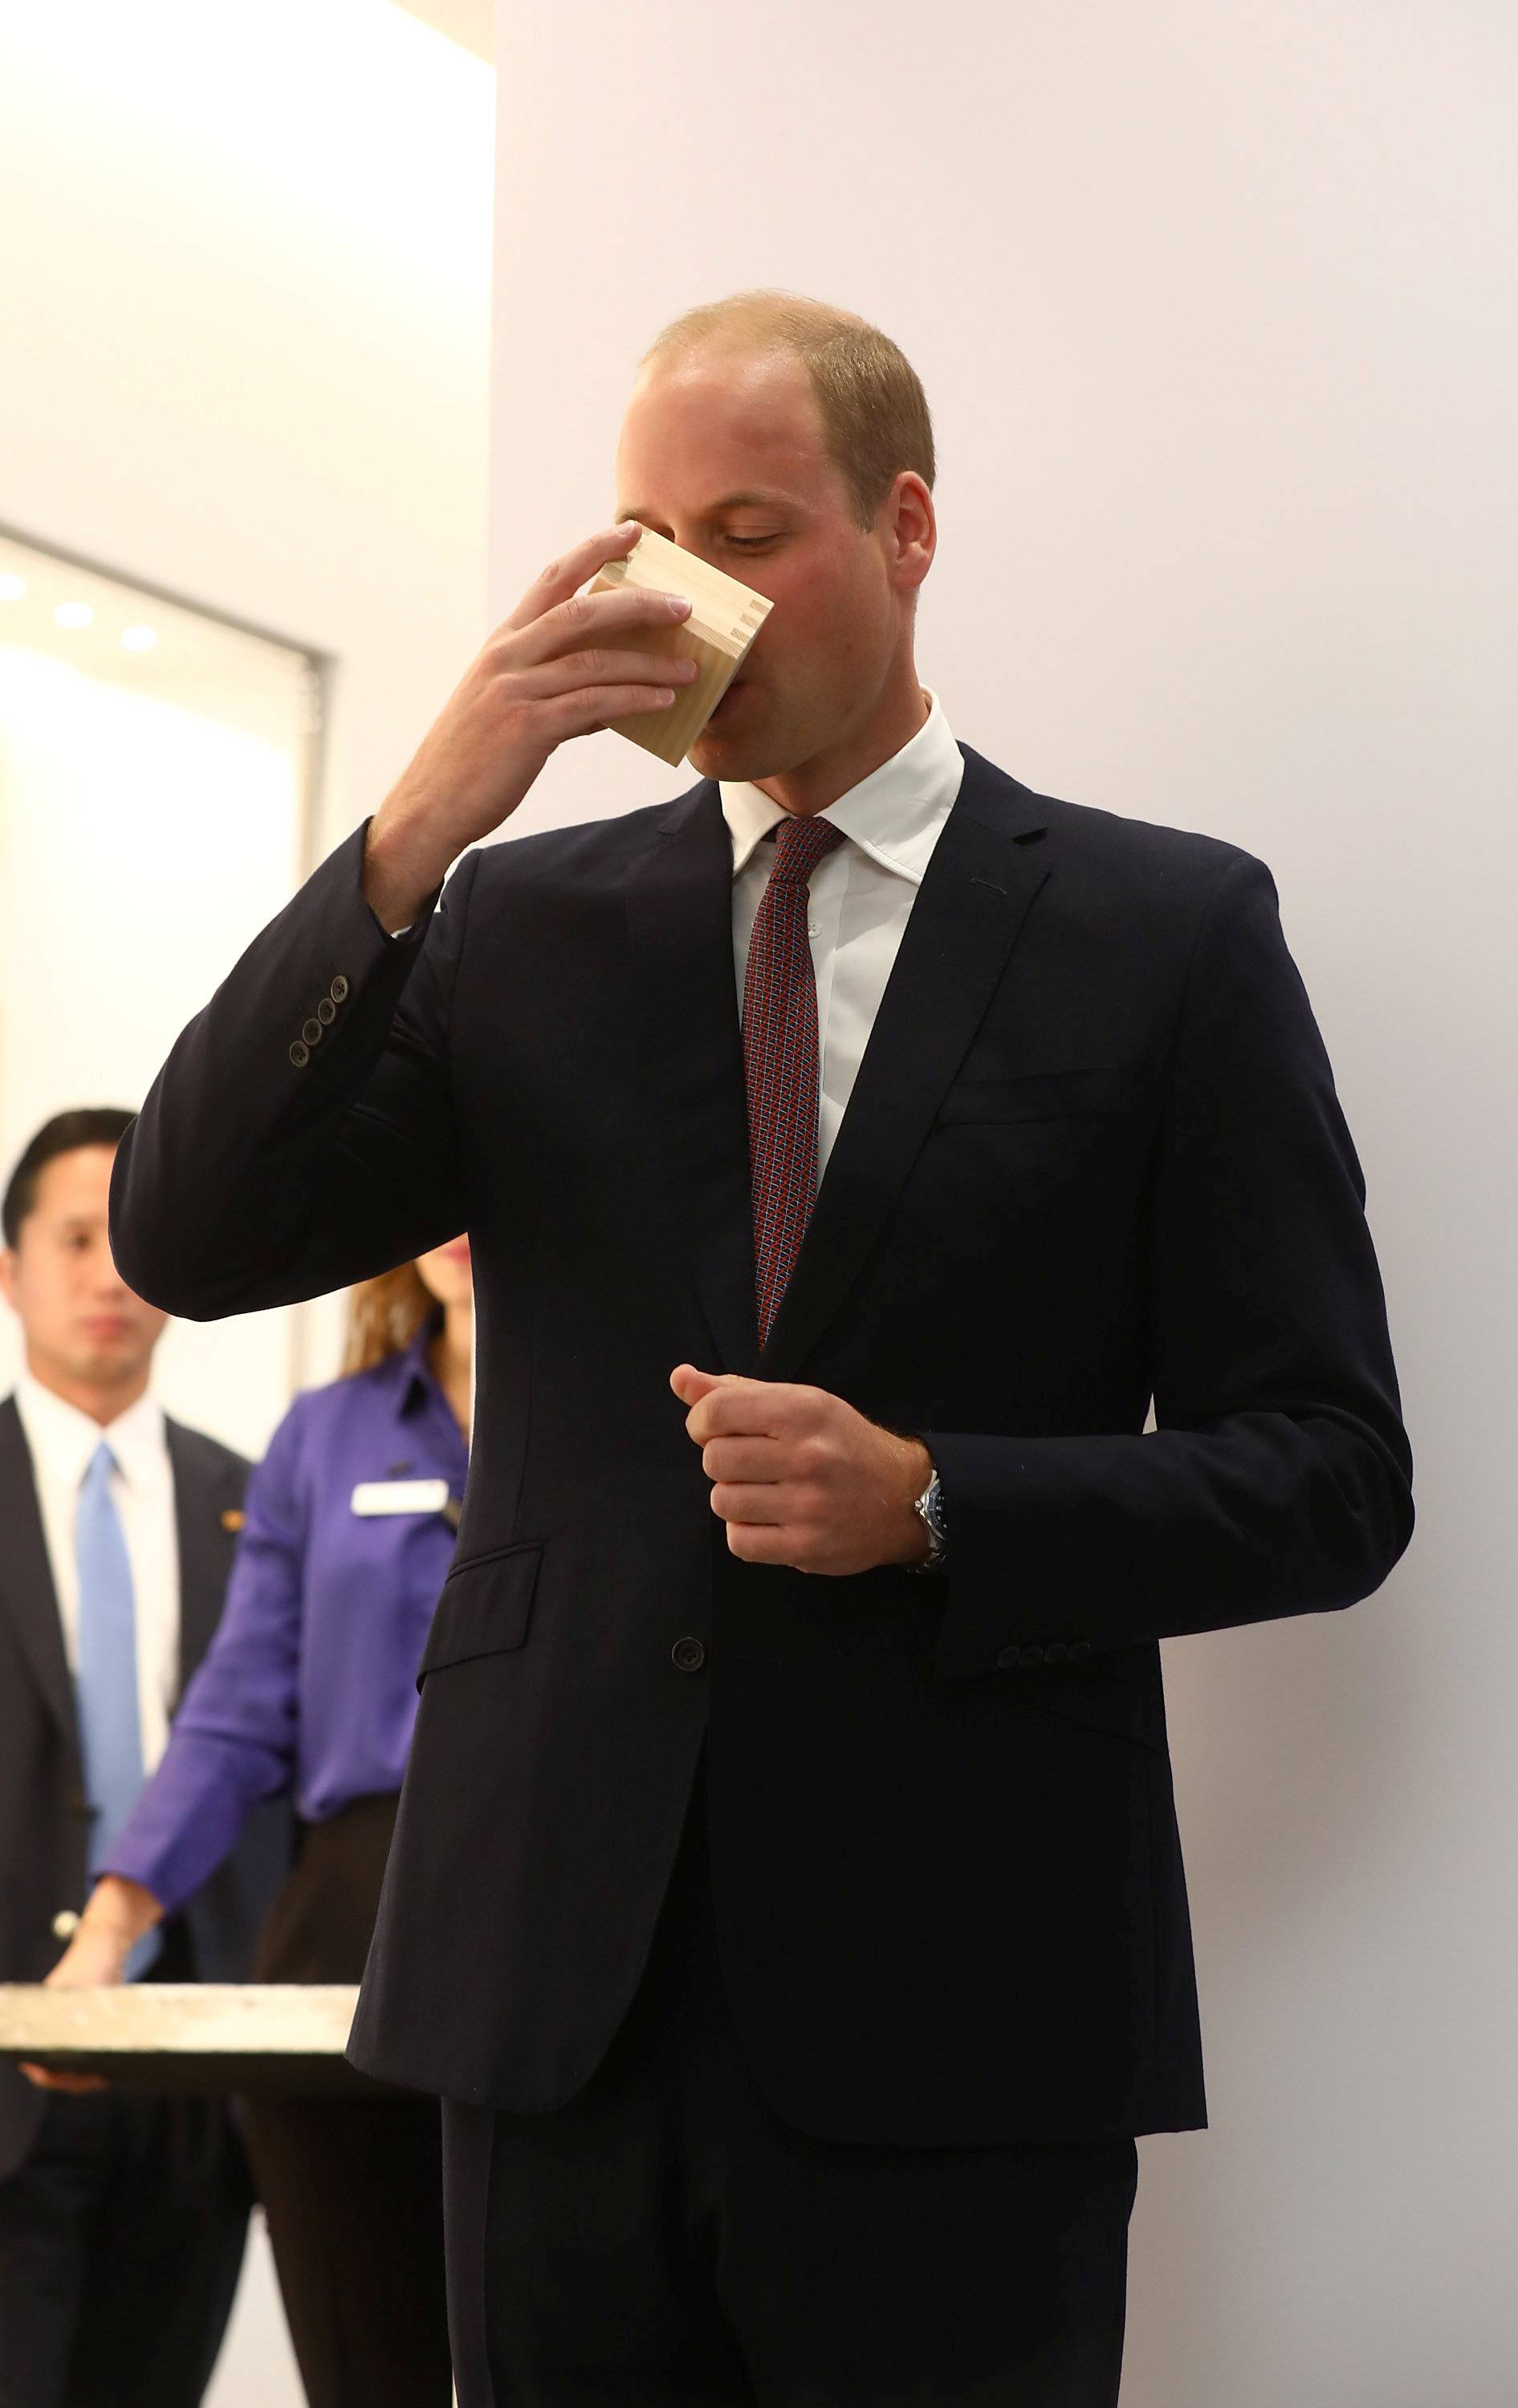 Britain's Prince William takes a sip of sake at the official opening of Japan House in London